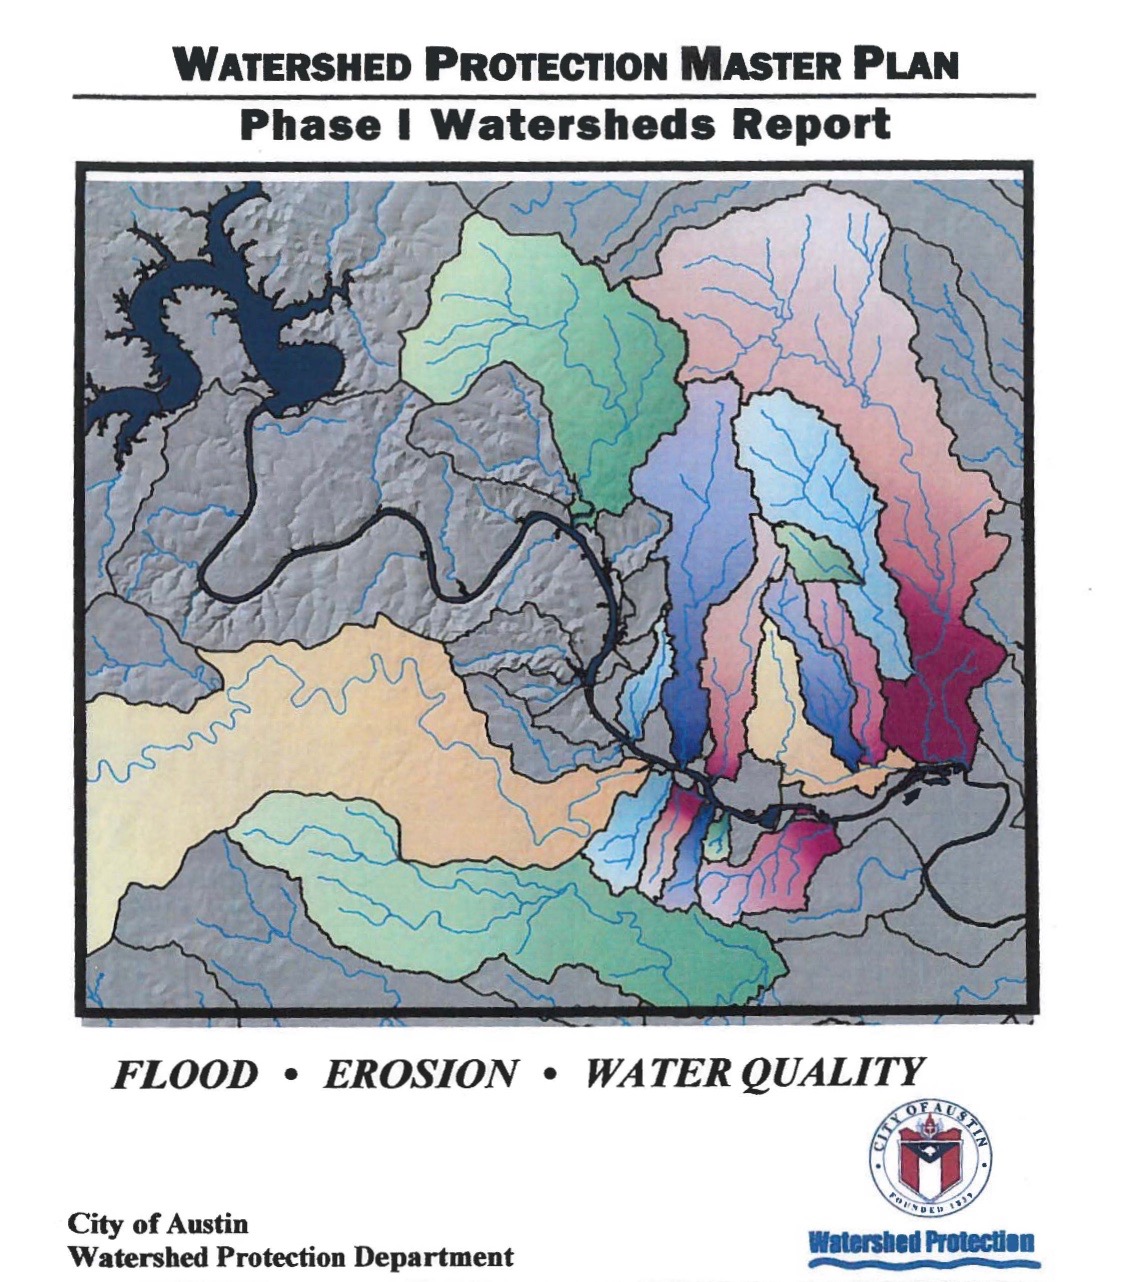 2001 Watershed Protection Department Master Plan (City of Austin, Watershed Protection Department)